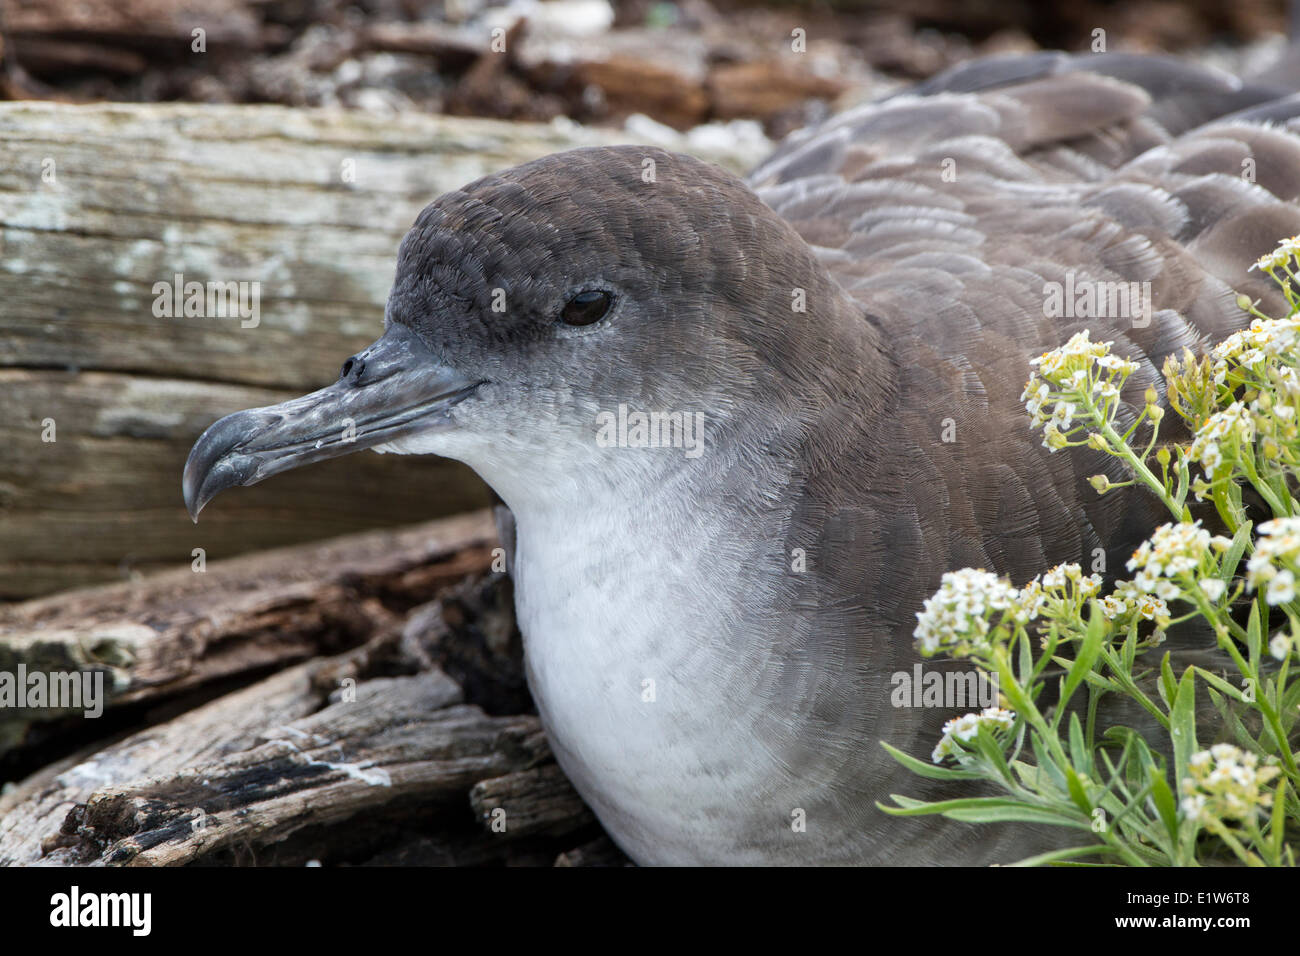 Cuneo-tailed shearwater (Puffinus pacificus chlororhynchus) Isola Orientale atollo di Midway National Wildlife Refuge Northwest Foto Stock